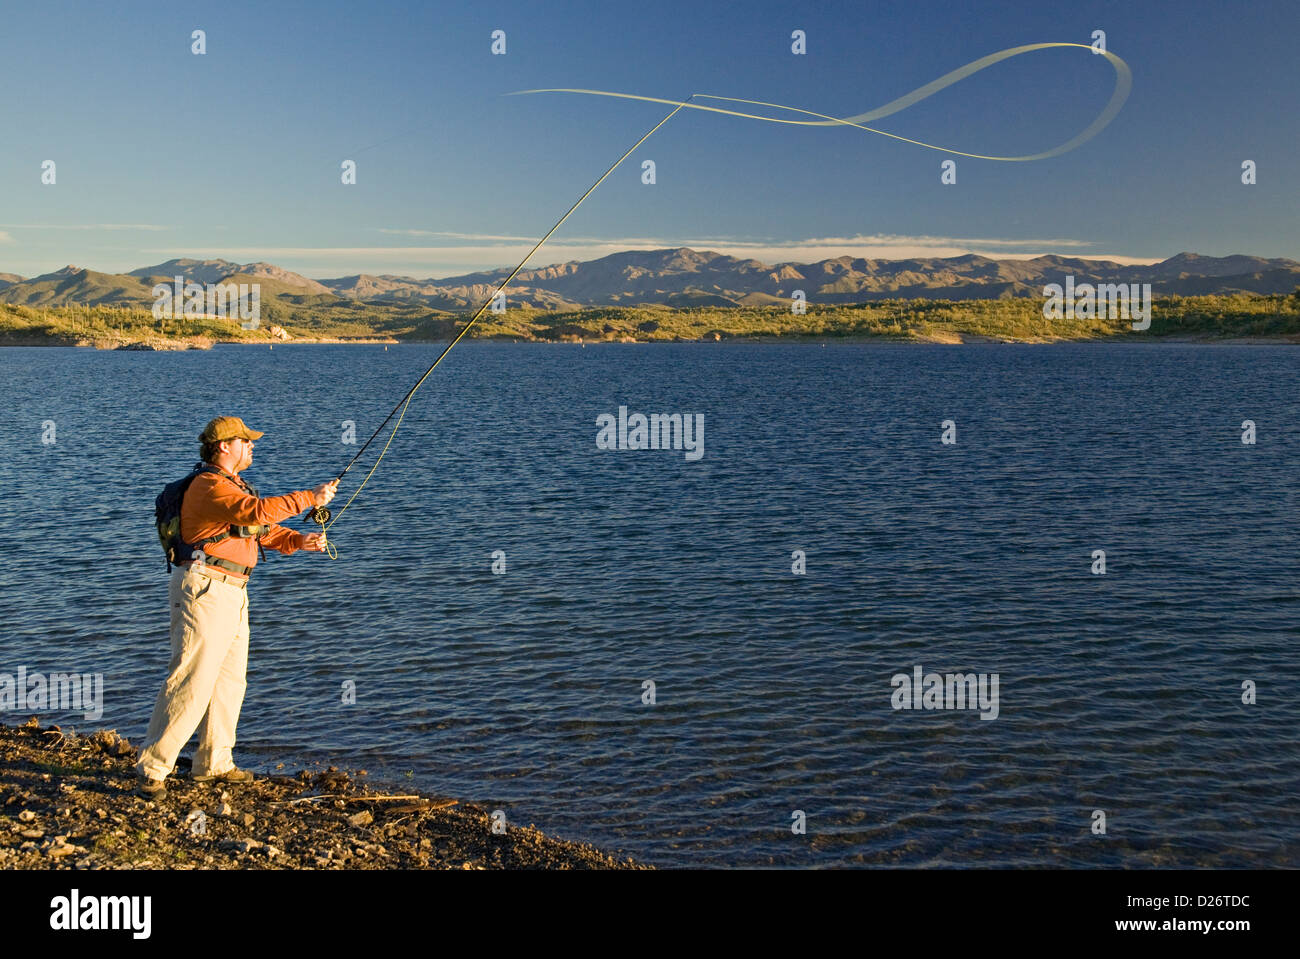 Man fly fishing along the desert shoreline of Lake Pleasant with the foothills of the Bradshaw Mountains in the distance. Stock Photo